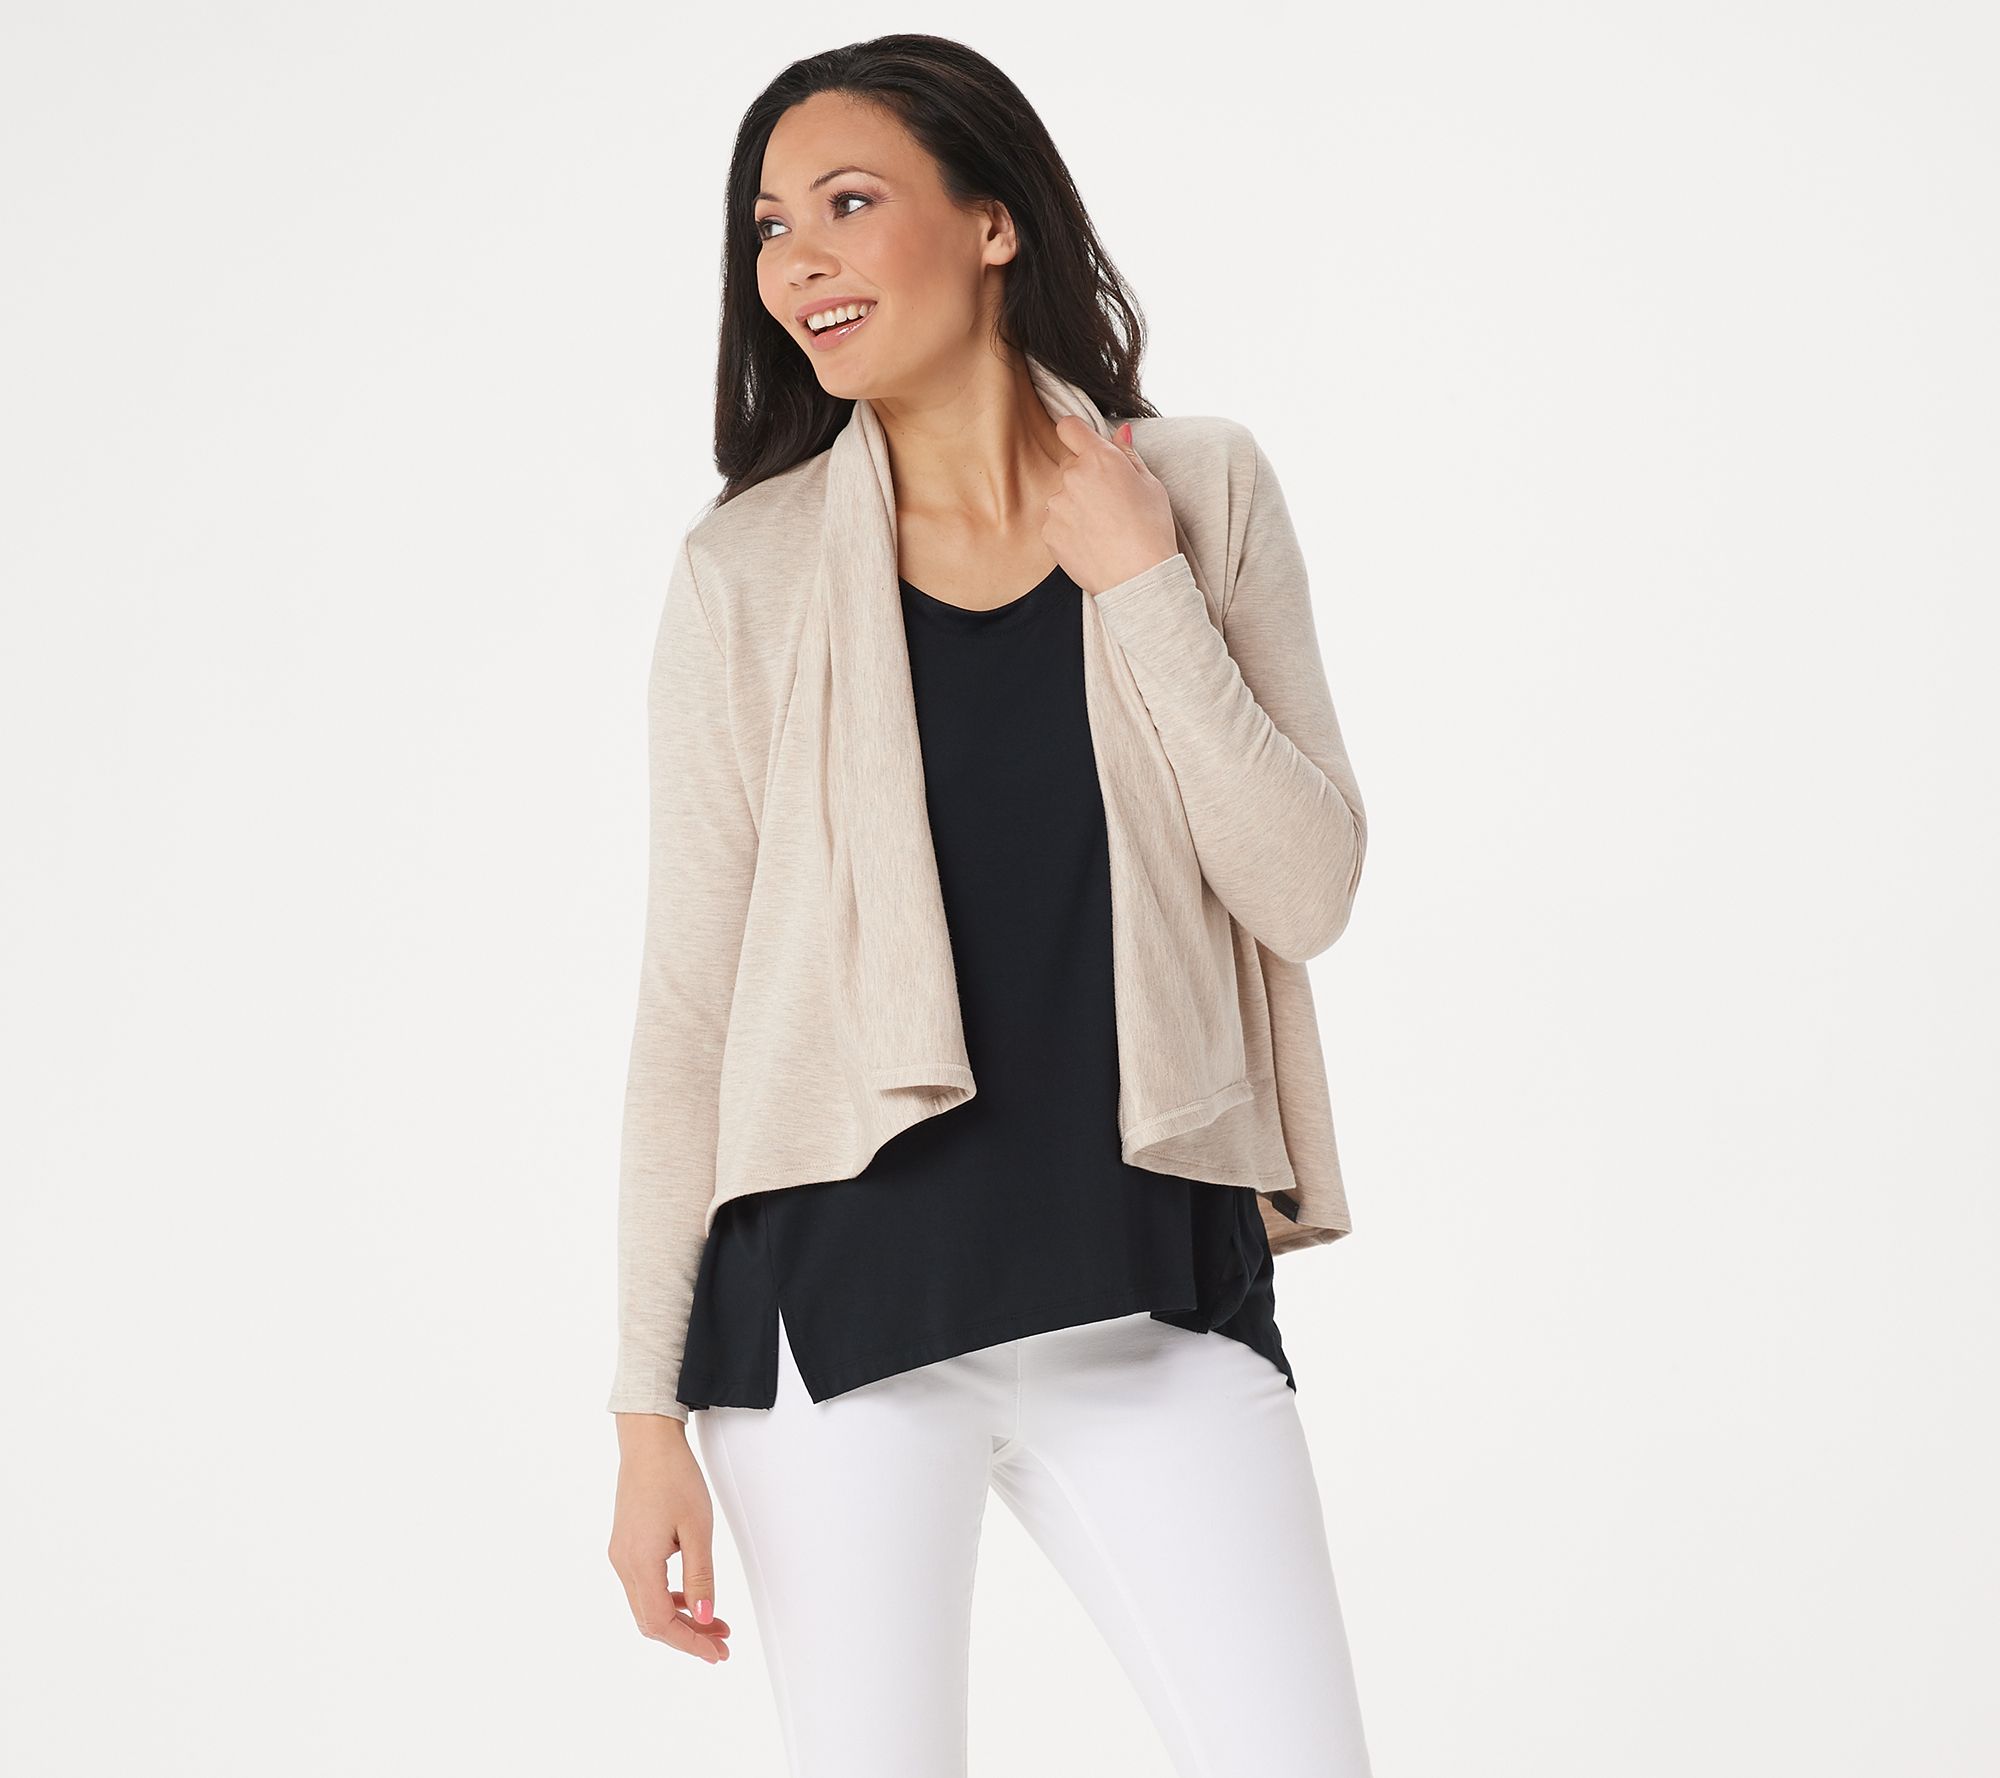 Skechers Apparel One and Done Wrap Jacket - QVC.com